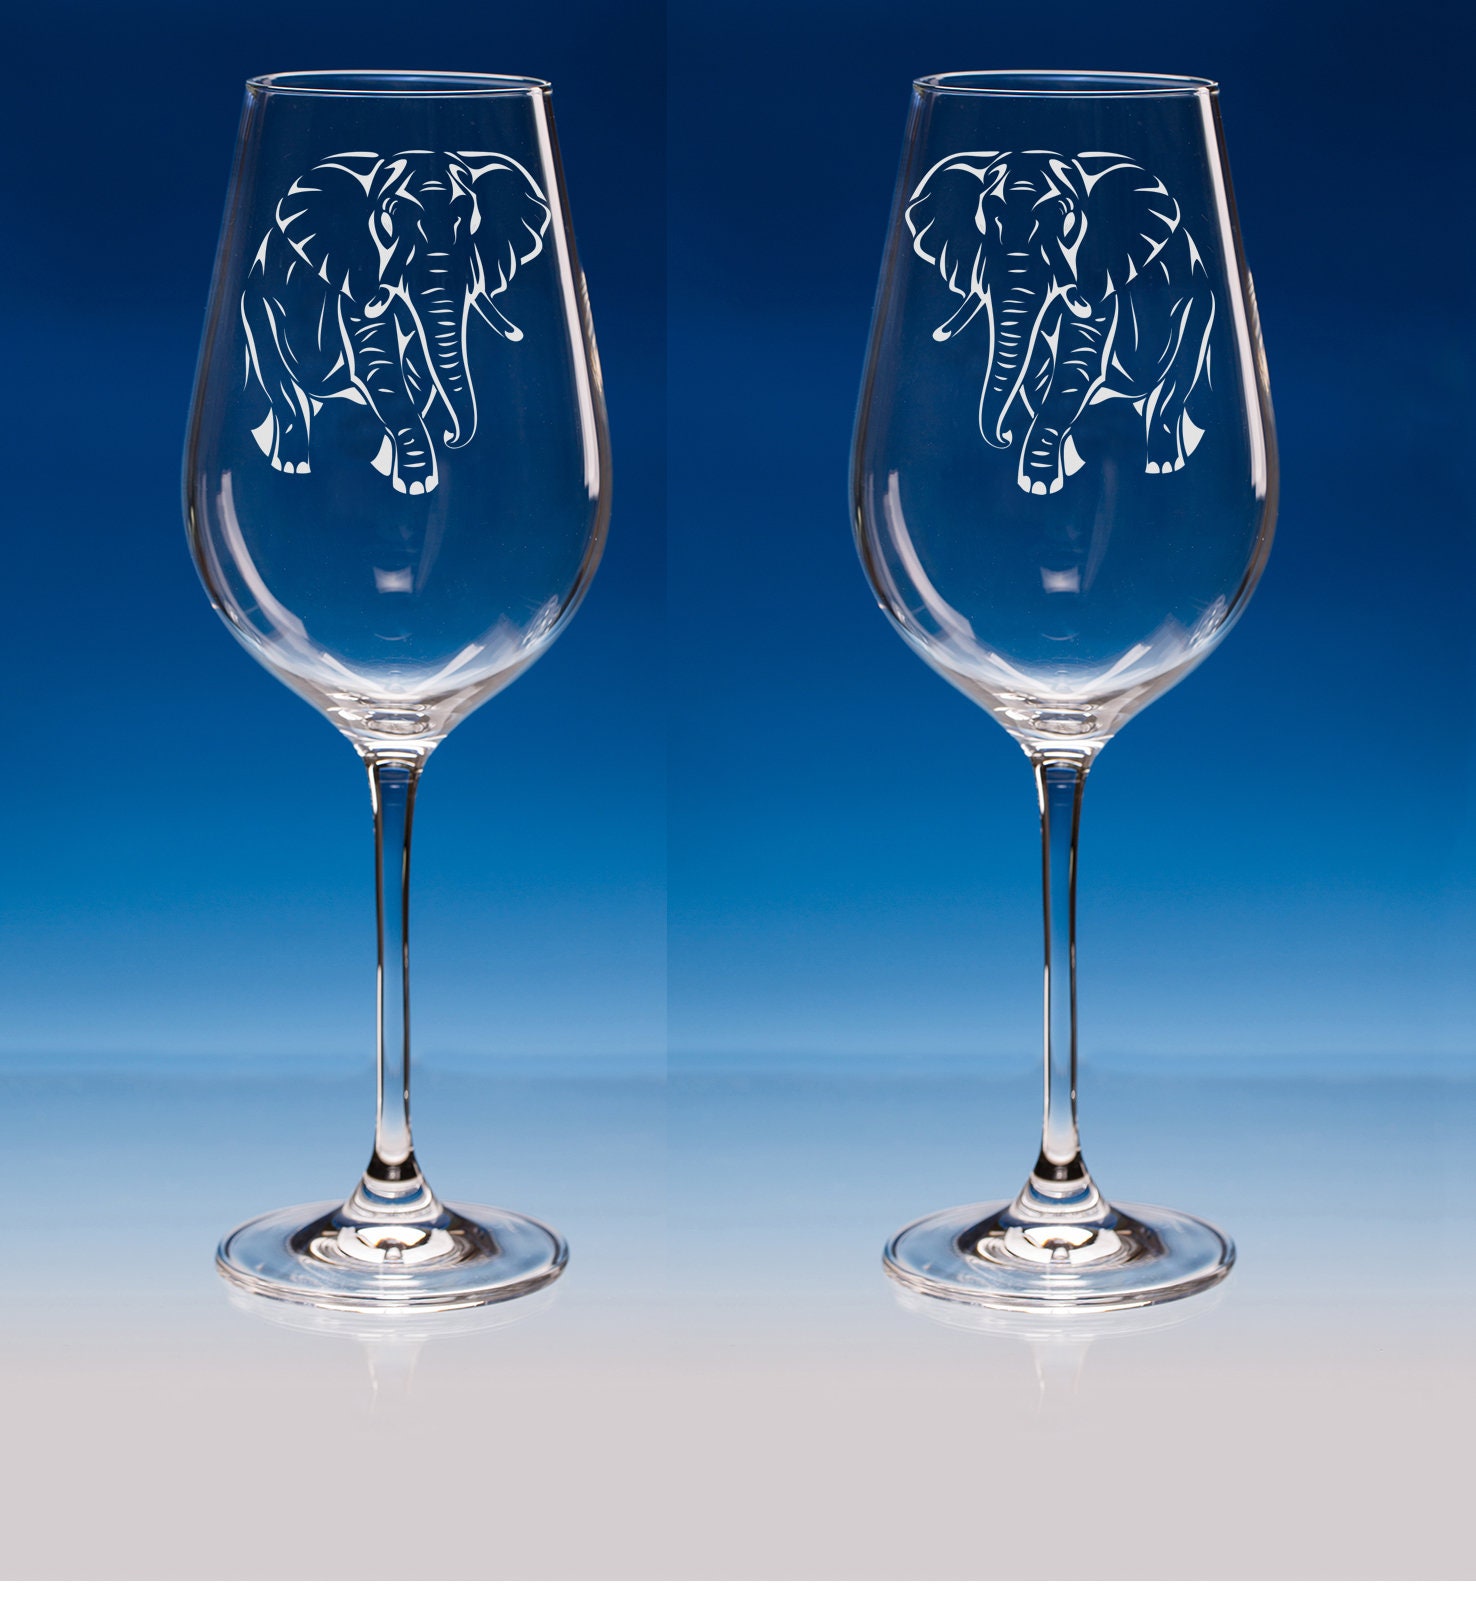 Animo Elephants Engraved Crystal Wine Drinking Glass Hand Decorated Gift Box 